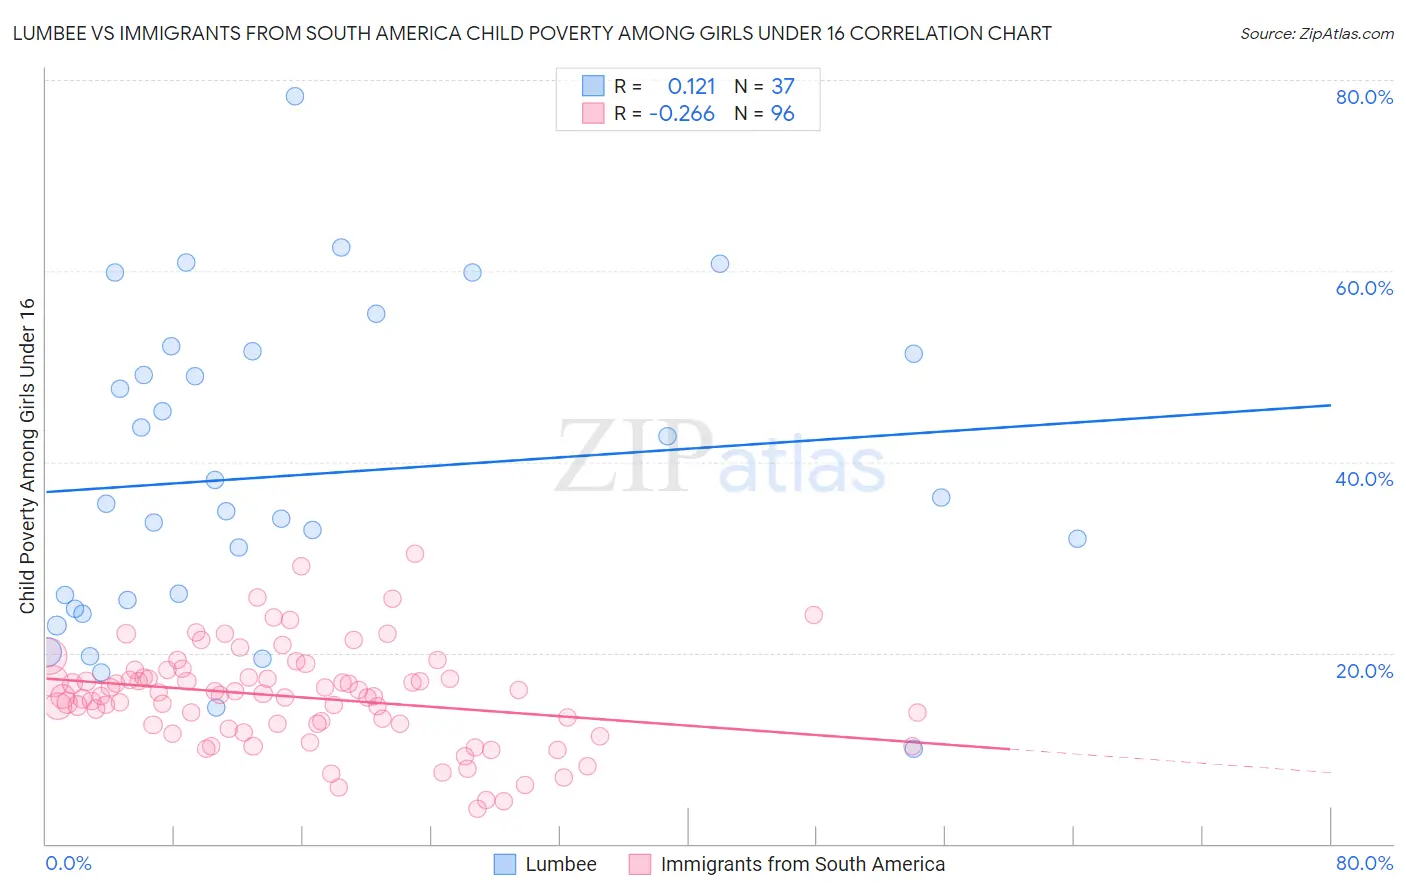 Lumbee vs Immigrants from South America Child Poverty Among Girls Under 16